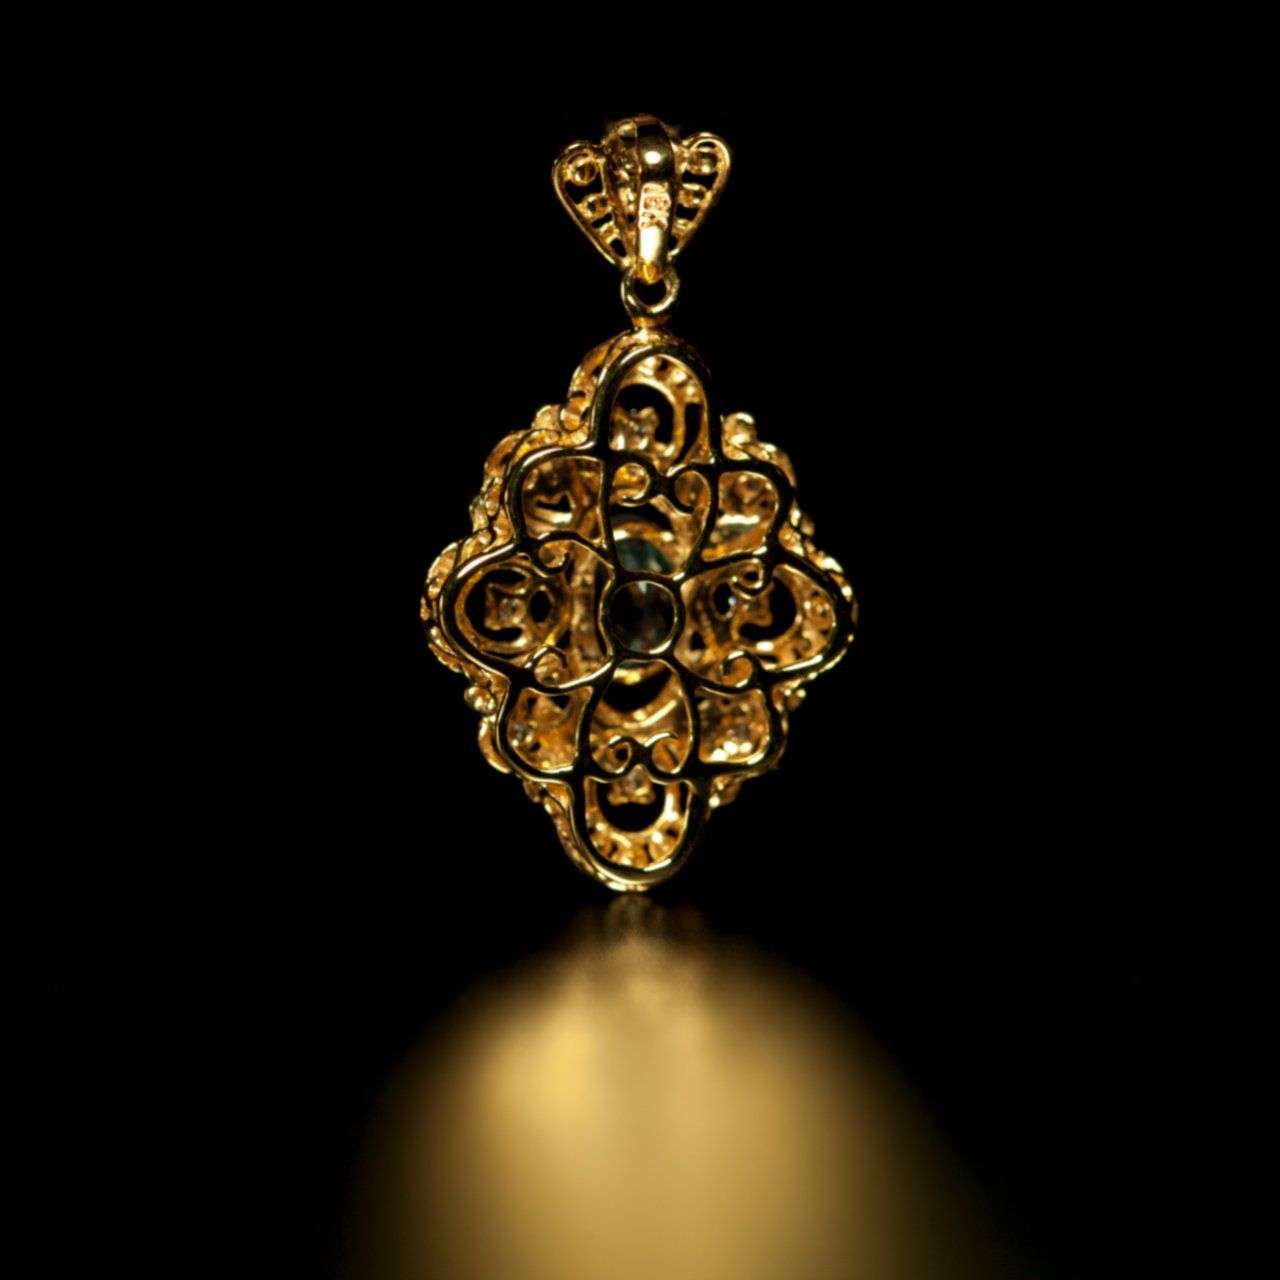 18k yellow gold filigree pendant with a 0.30ct natural alexandrite